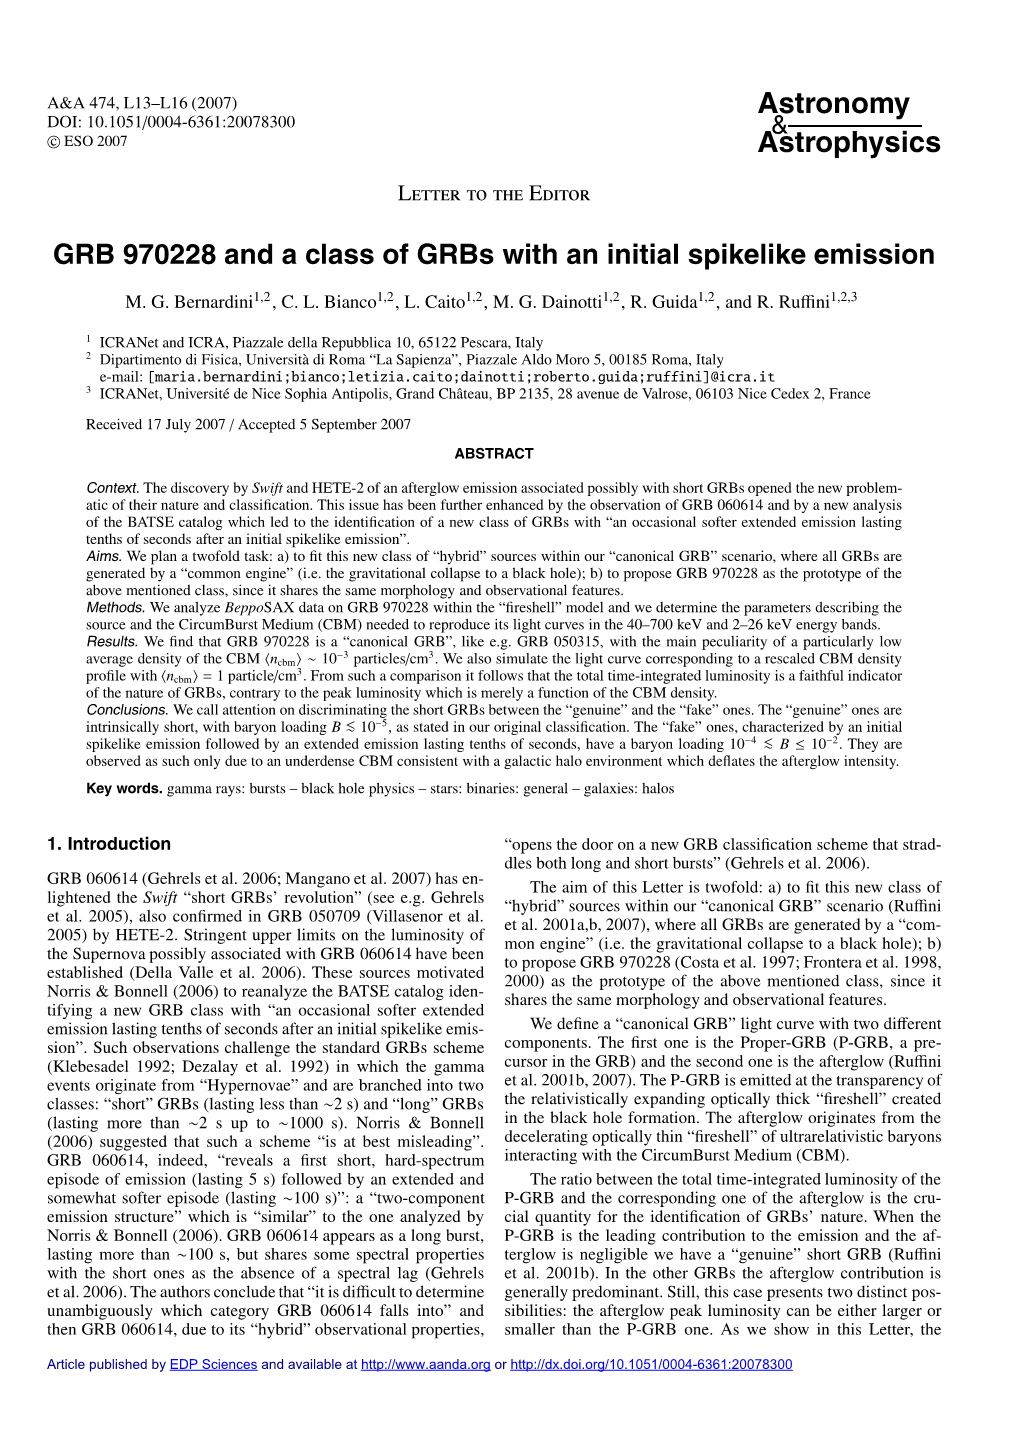 GRB 970228 and a Class of Grbs with an Initial Spikelike Emission